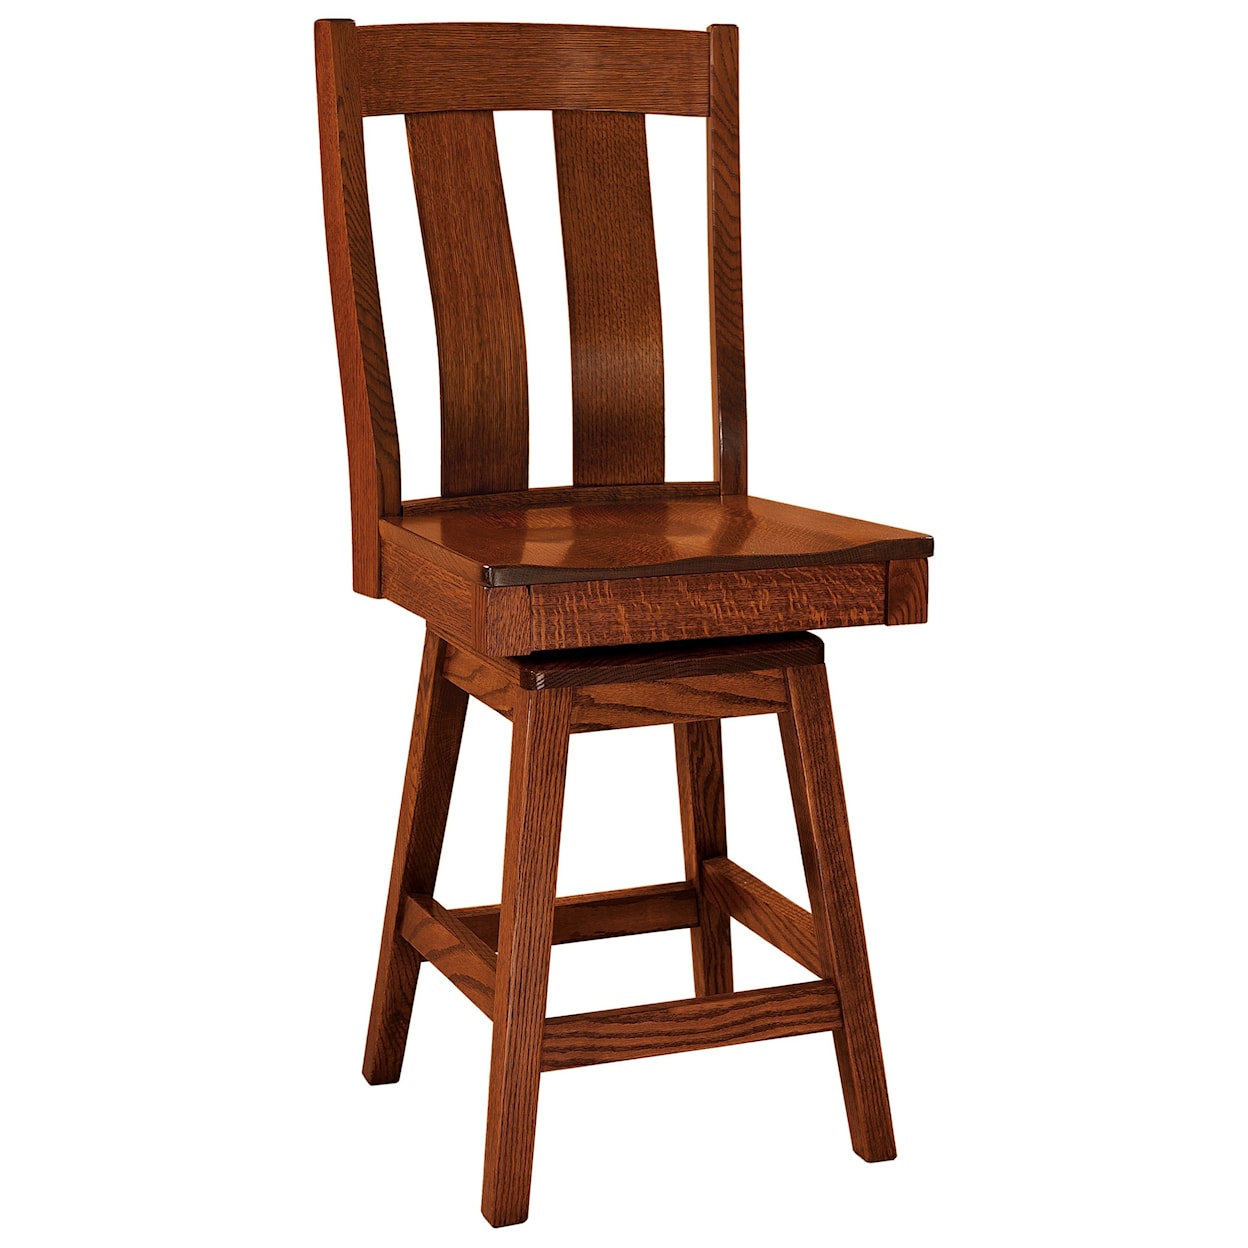 F&N Woodworking Laurie Swivel Counter Height Stool - Wood Seat